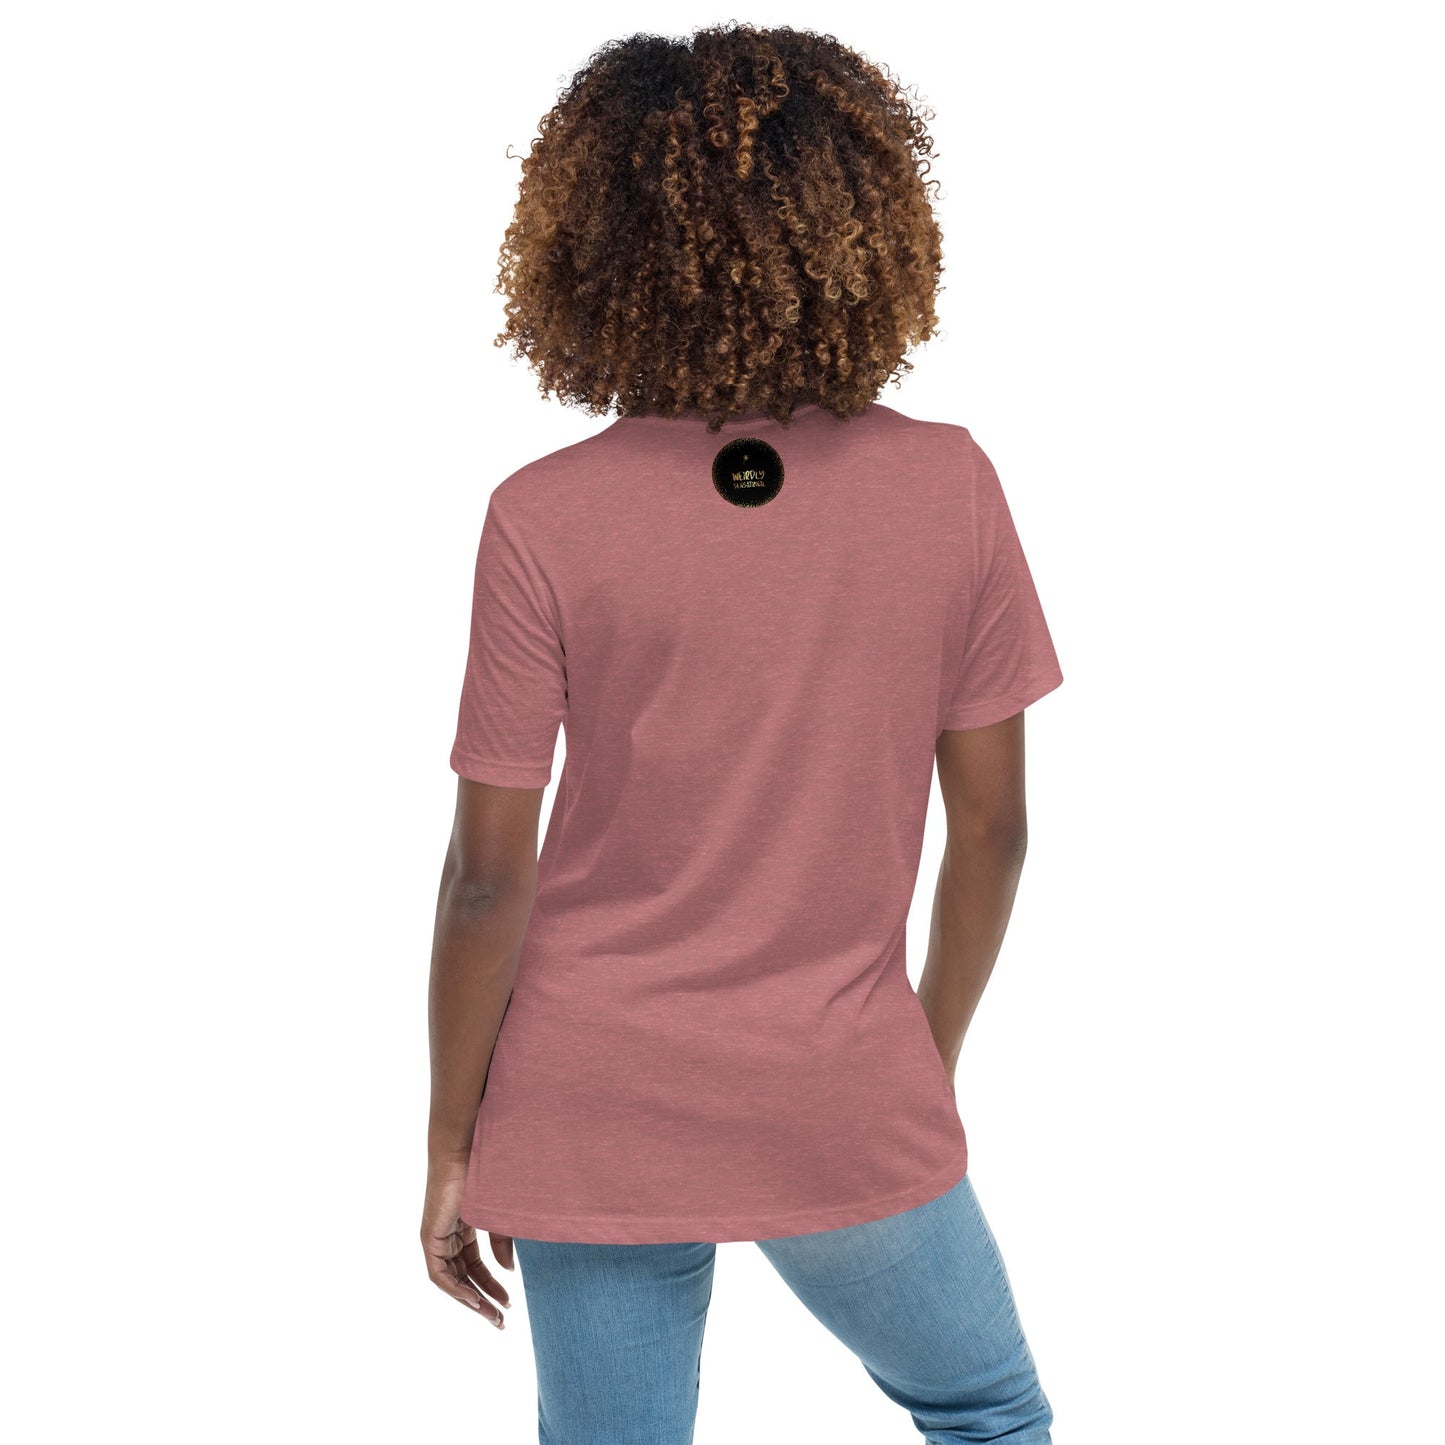 Sorry, what? Women's Relaxed T-Shirt - Weirdly Sensational